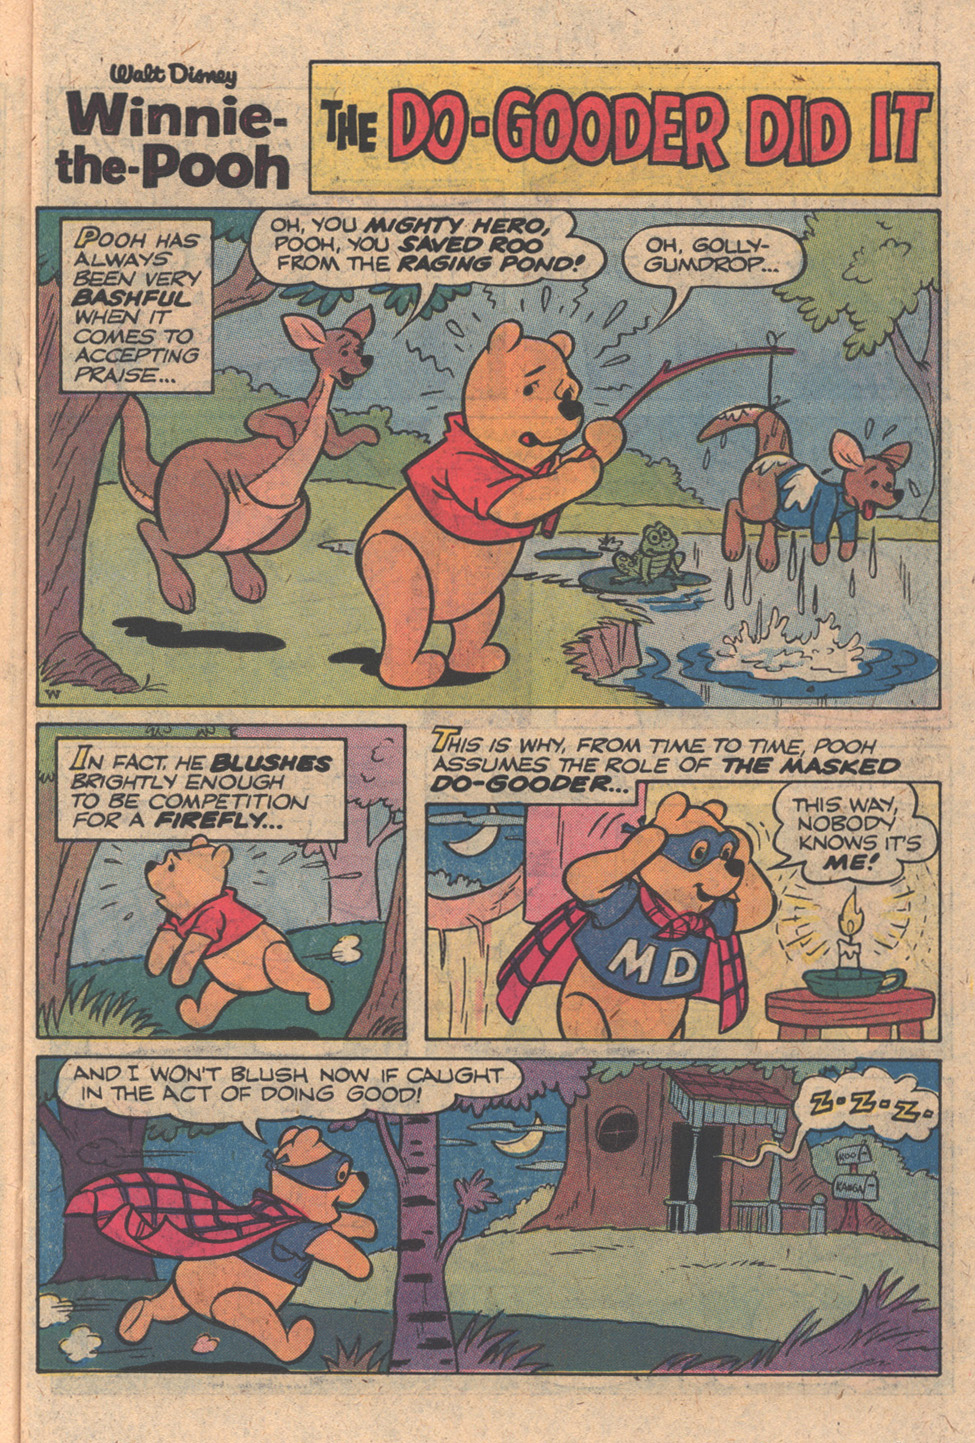 Read online Winnie-the-Pooh comic -  Issue #13 - 15